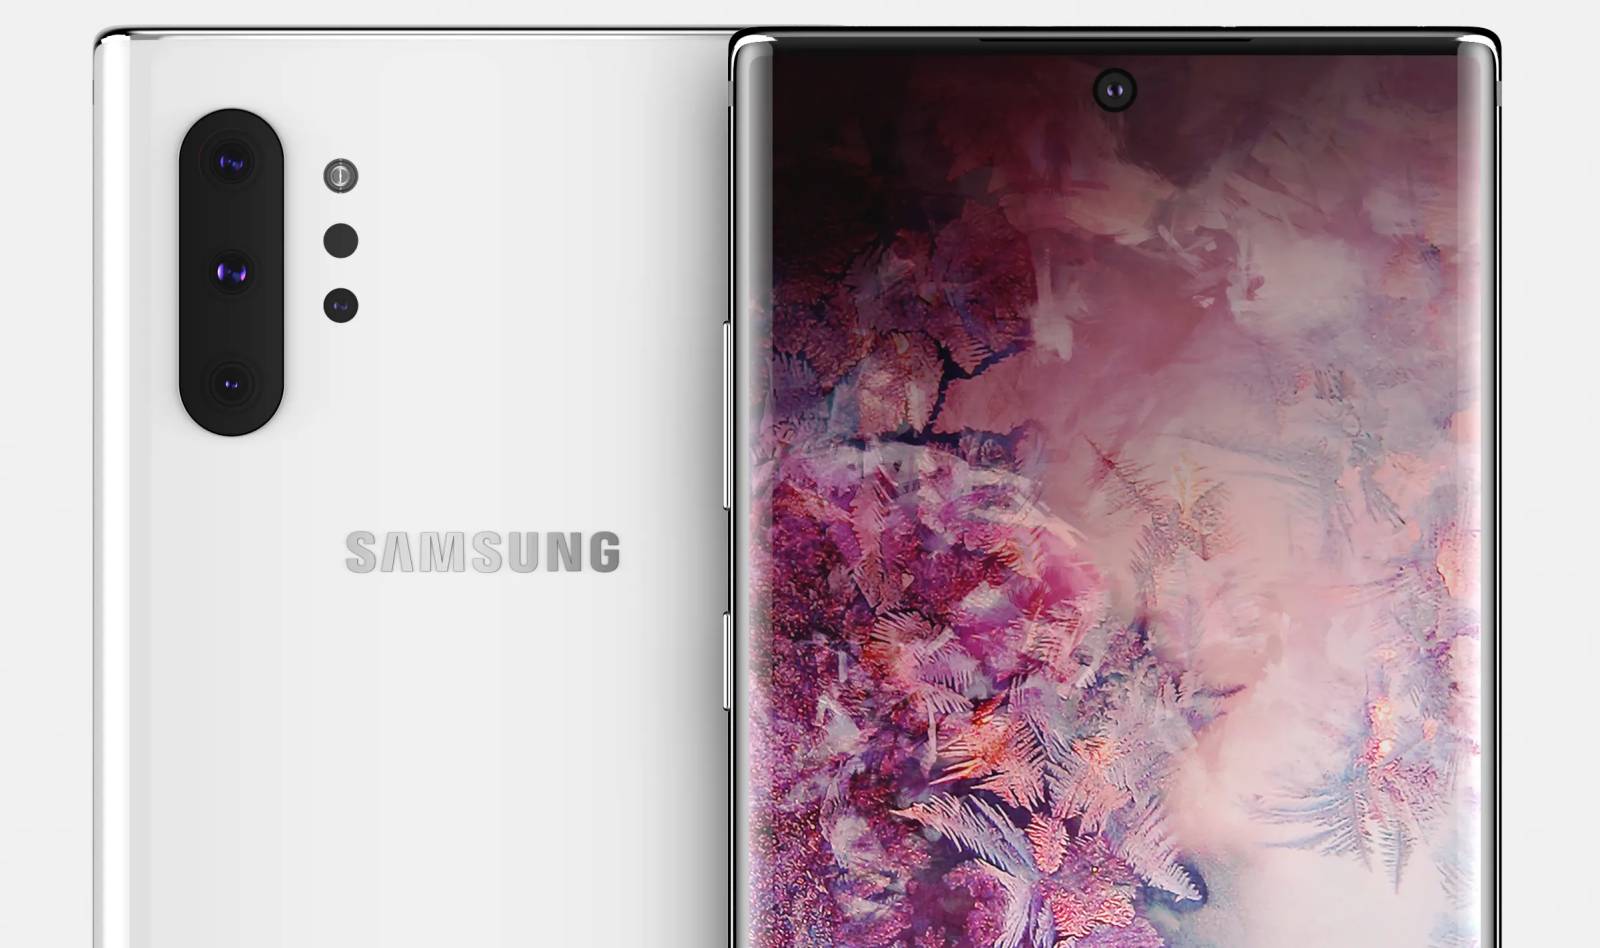 Samsung GALAXY Note 10 PRO shows phone